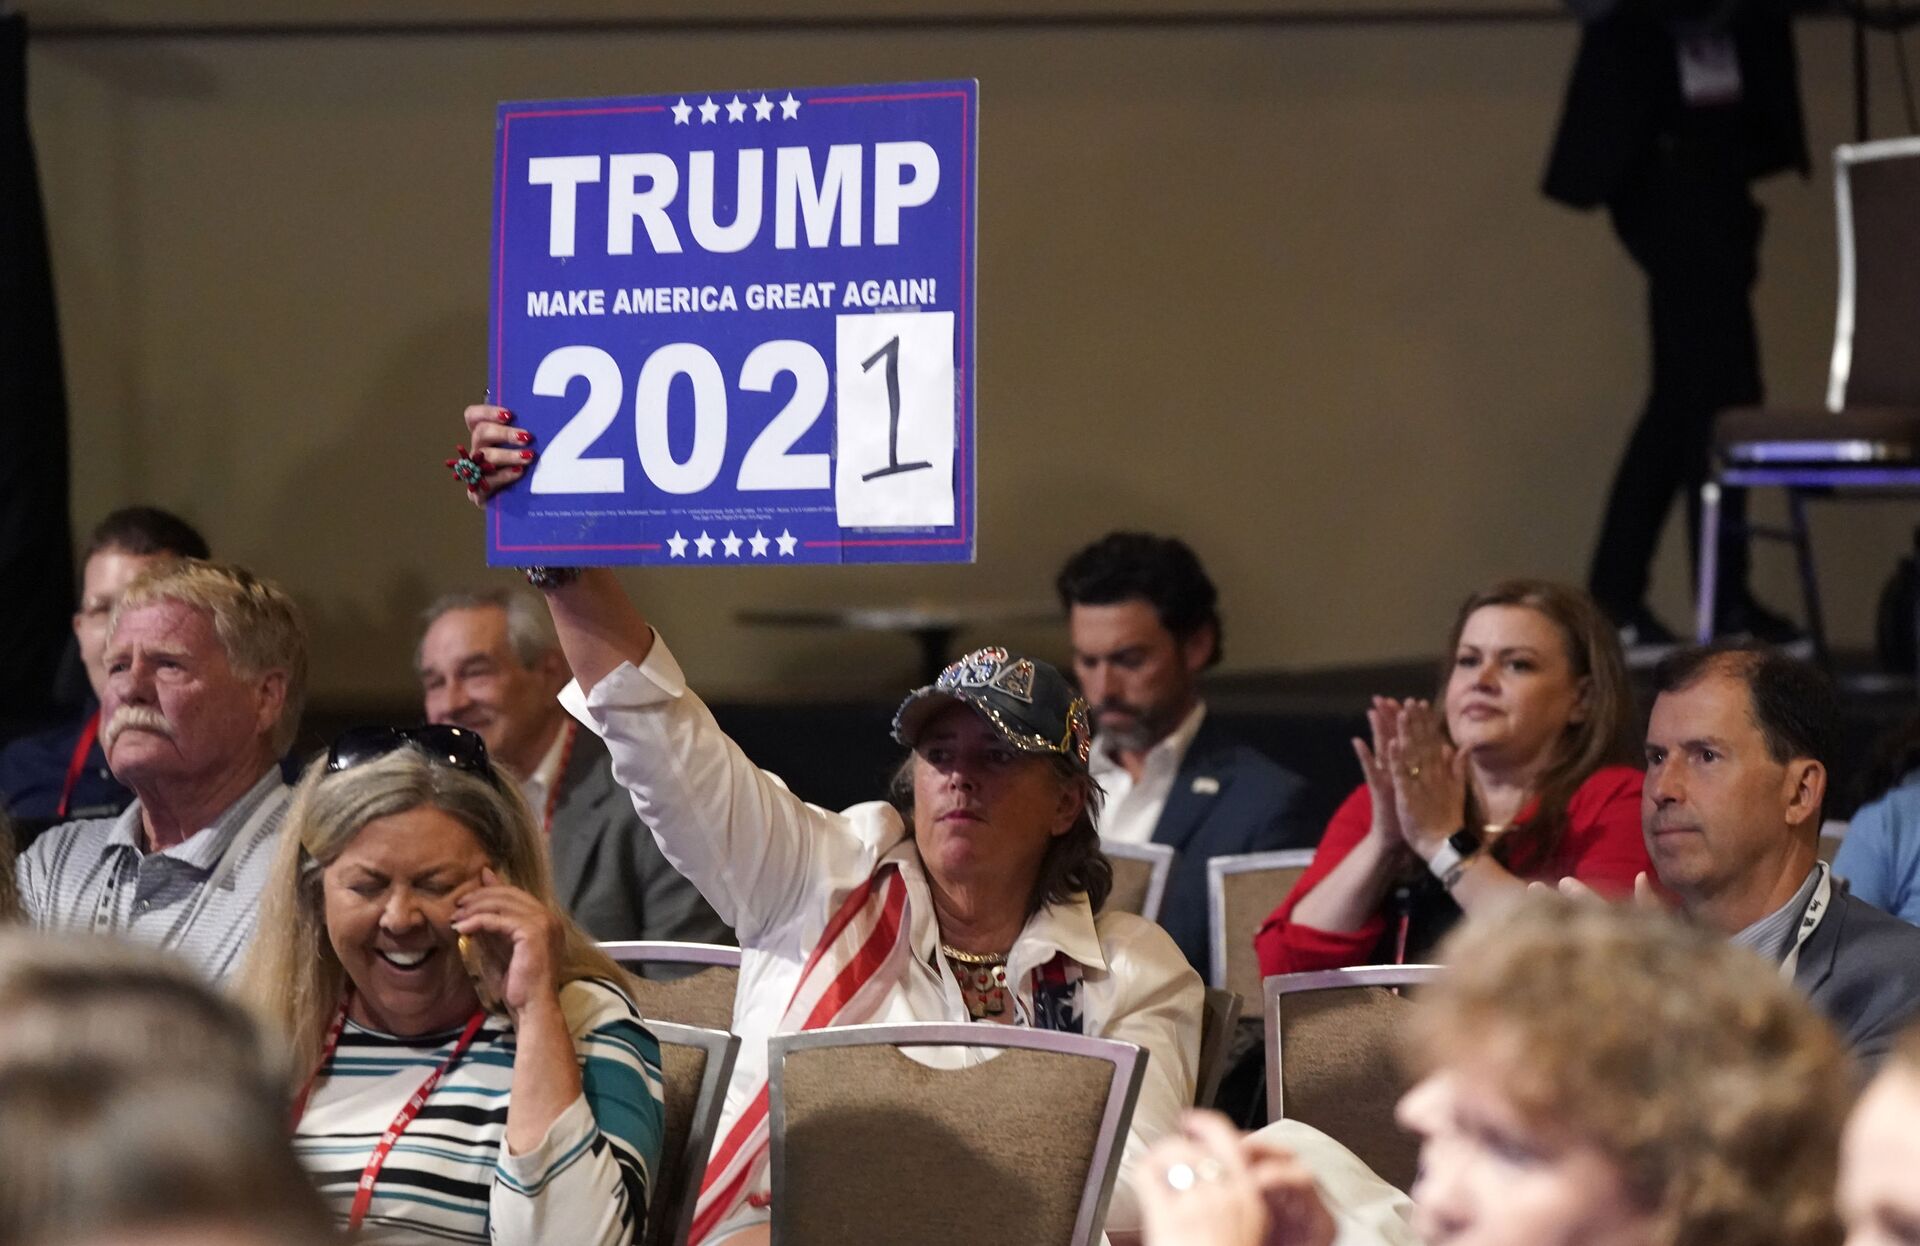 A conservative supporter holds up a sign during the opening general session of the Conservative Political Action Conference (CPAC) Friday, July 9, 2021, in Dallas. - Sputnik International, 1920, 07.09.2021